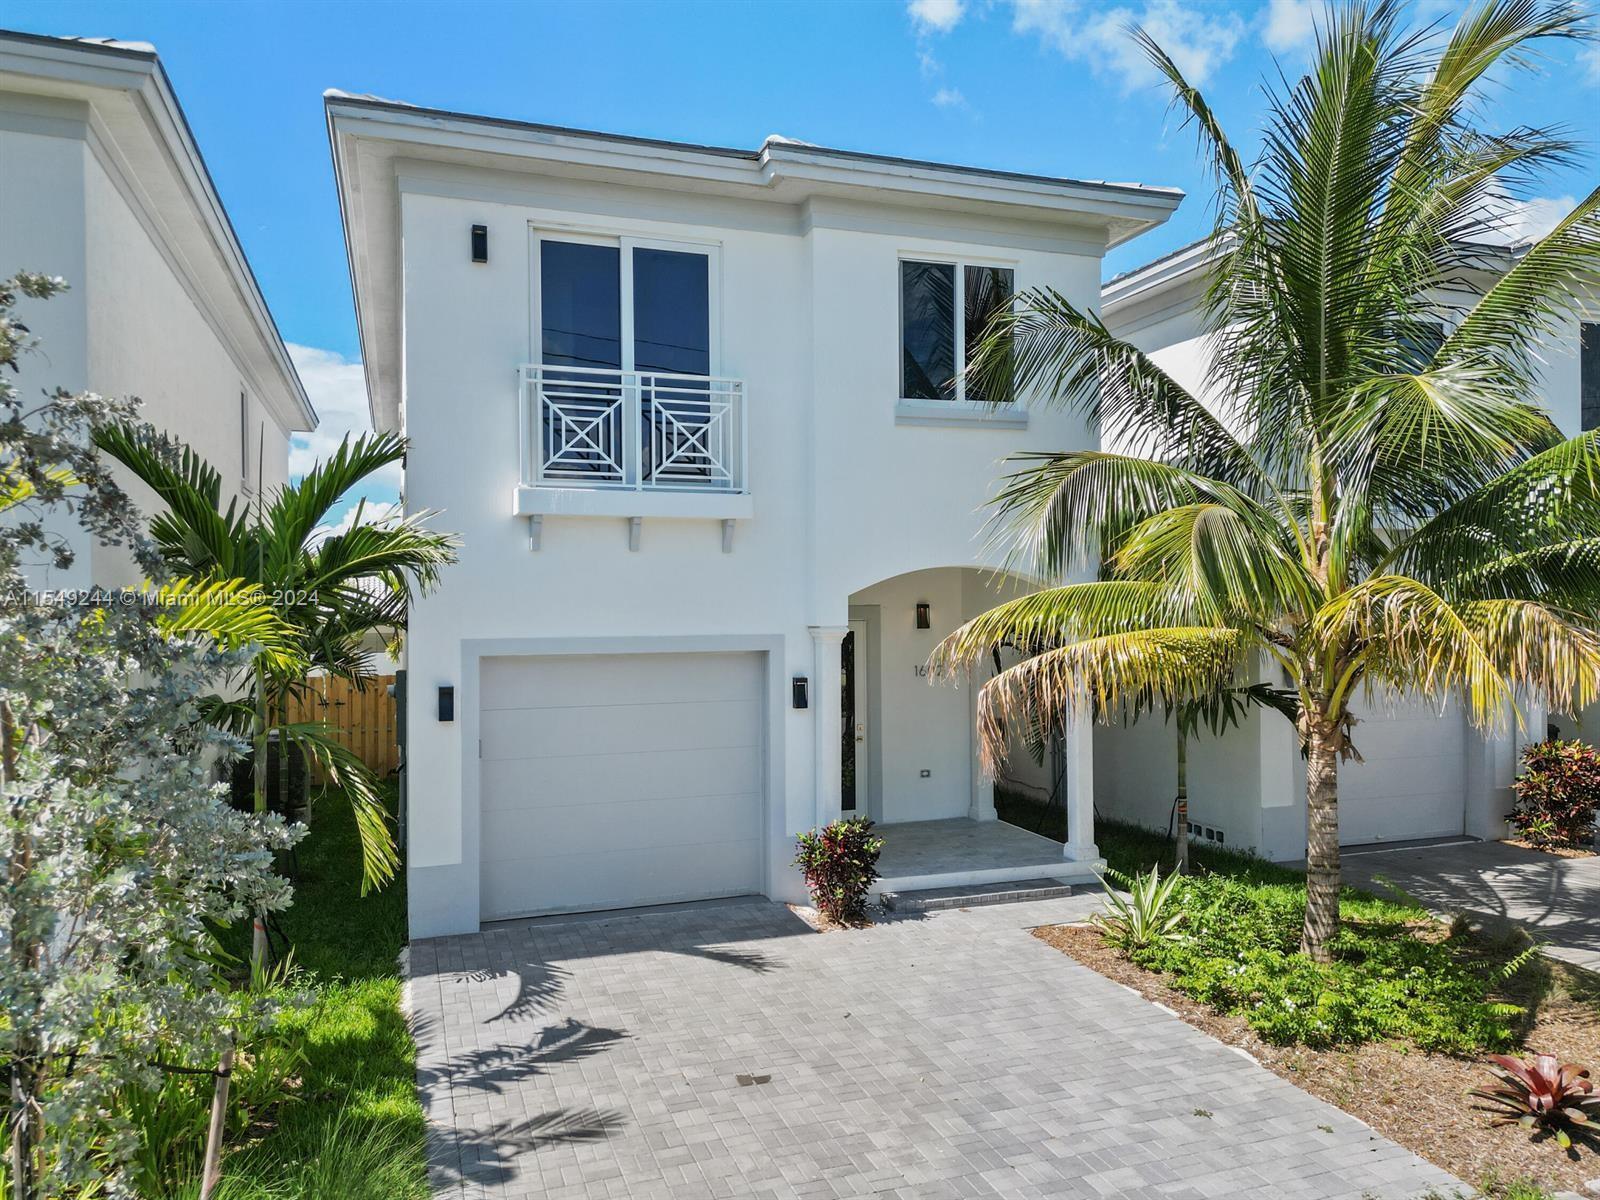 Photo of 1602 Hayes St in Hollywood, FL